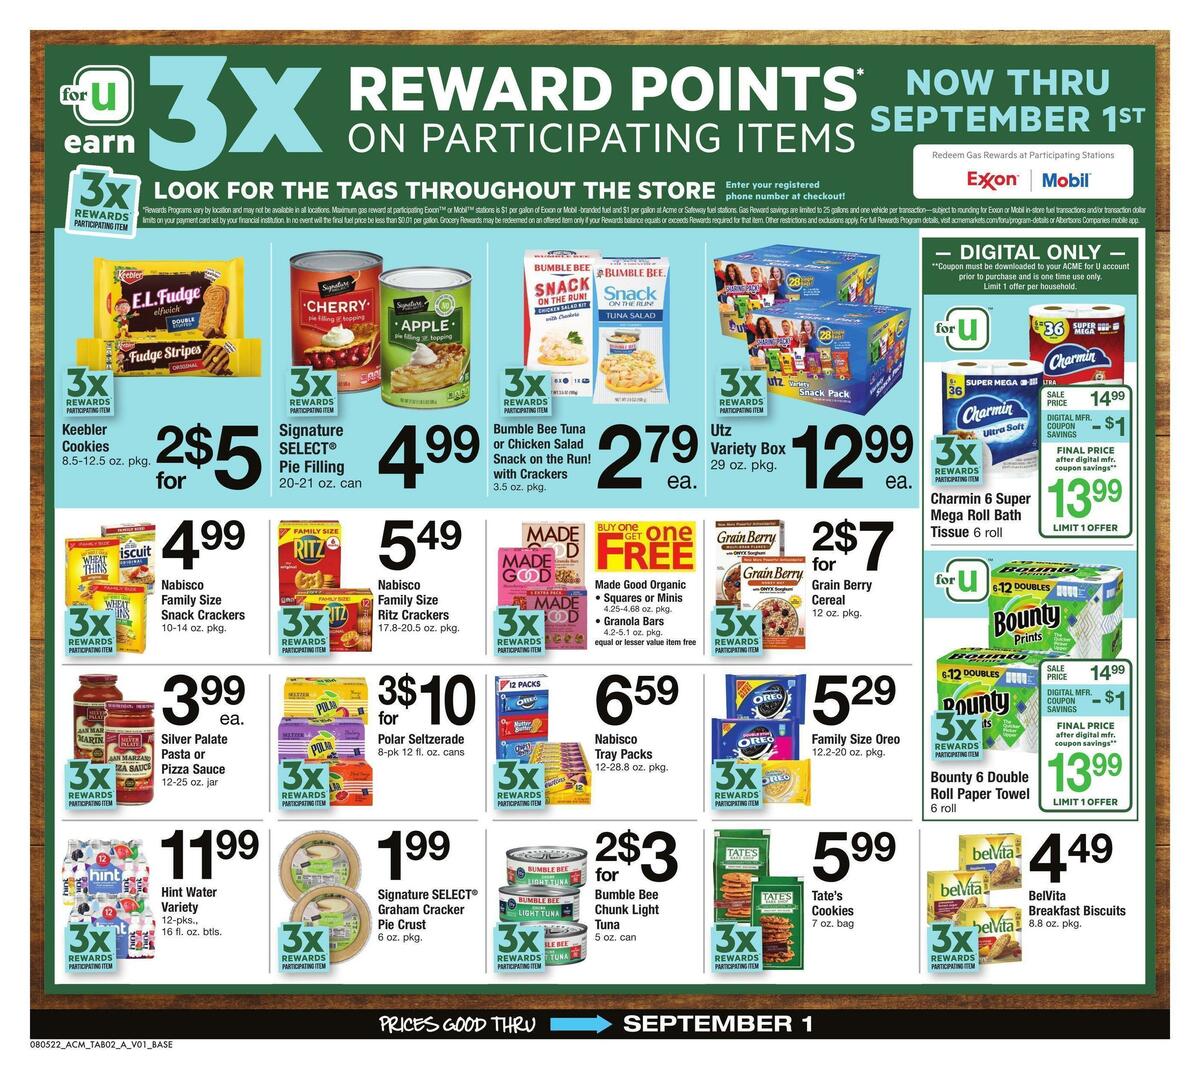 ACME Markets Big Book of Savings Weekly Ad from August 5